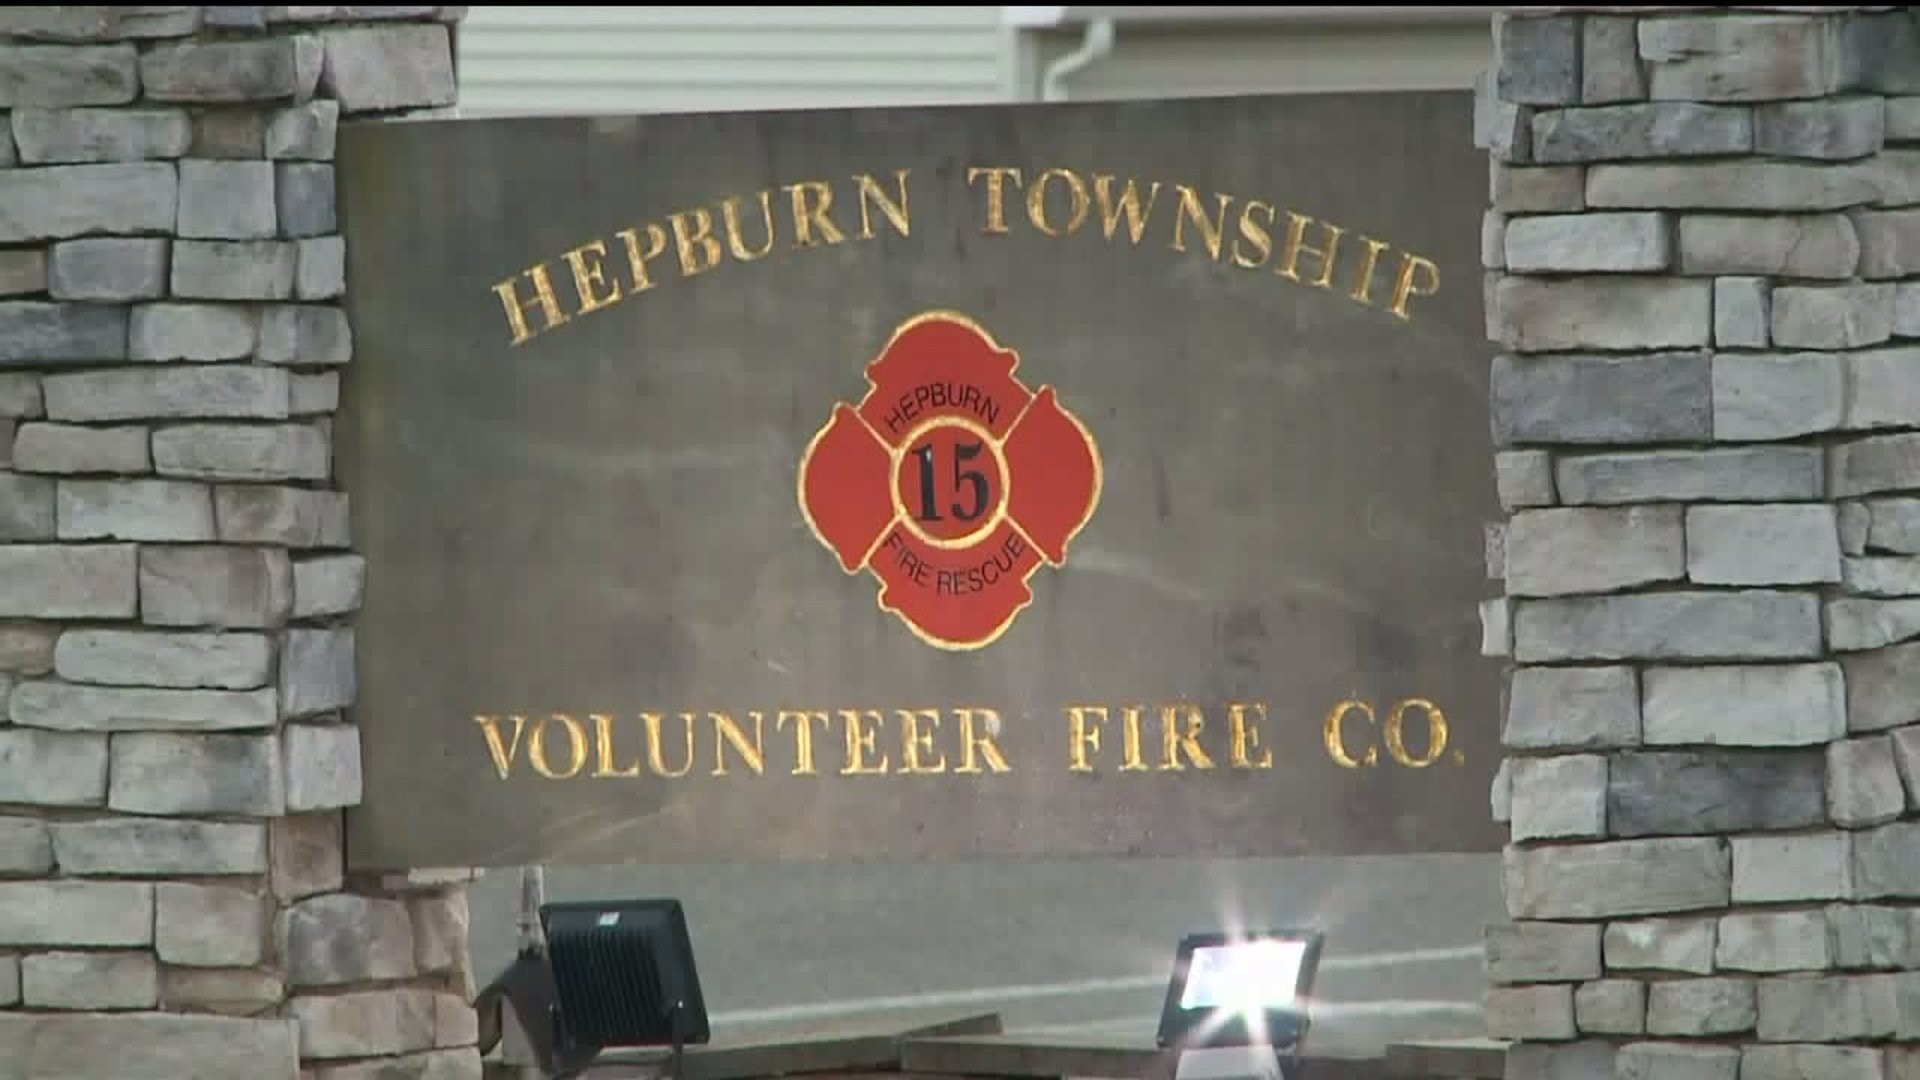 Firefighter Injured While Fighting Brush Fire